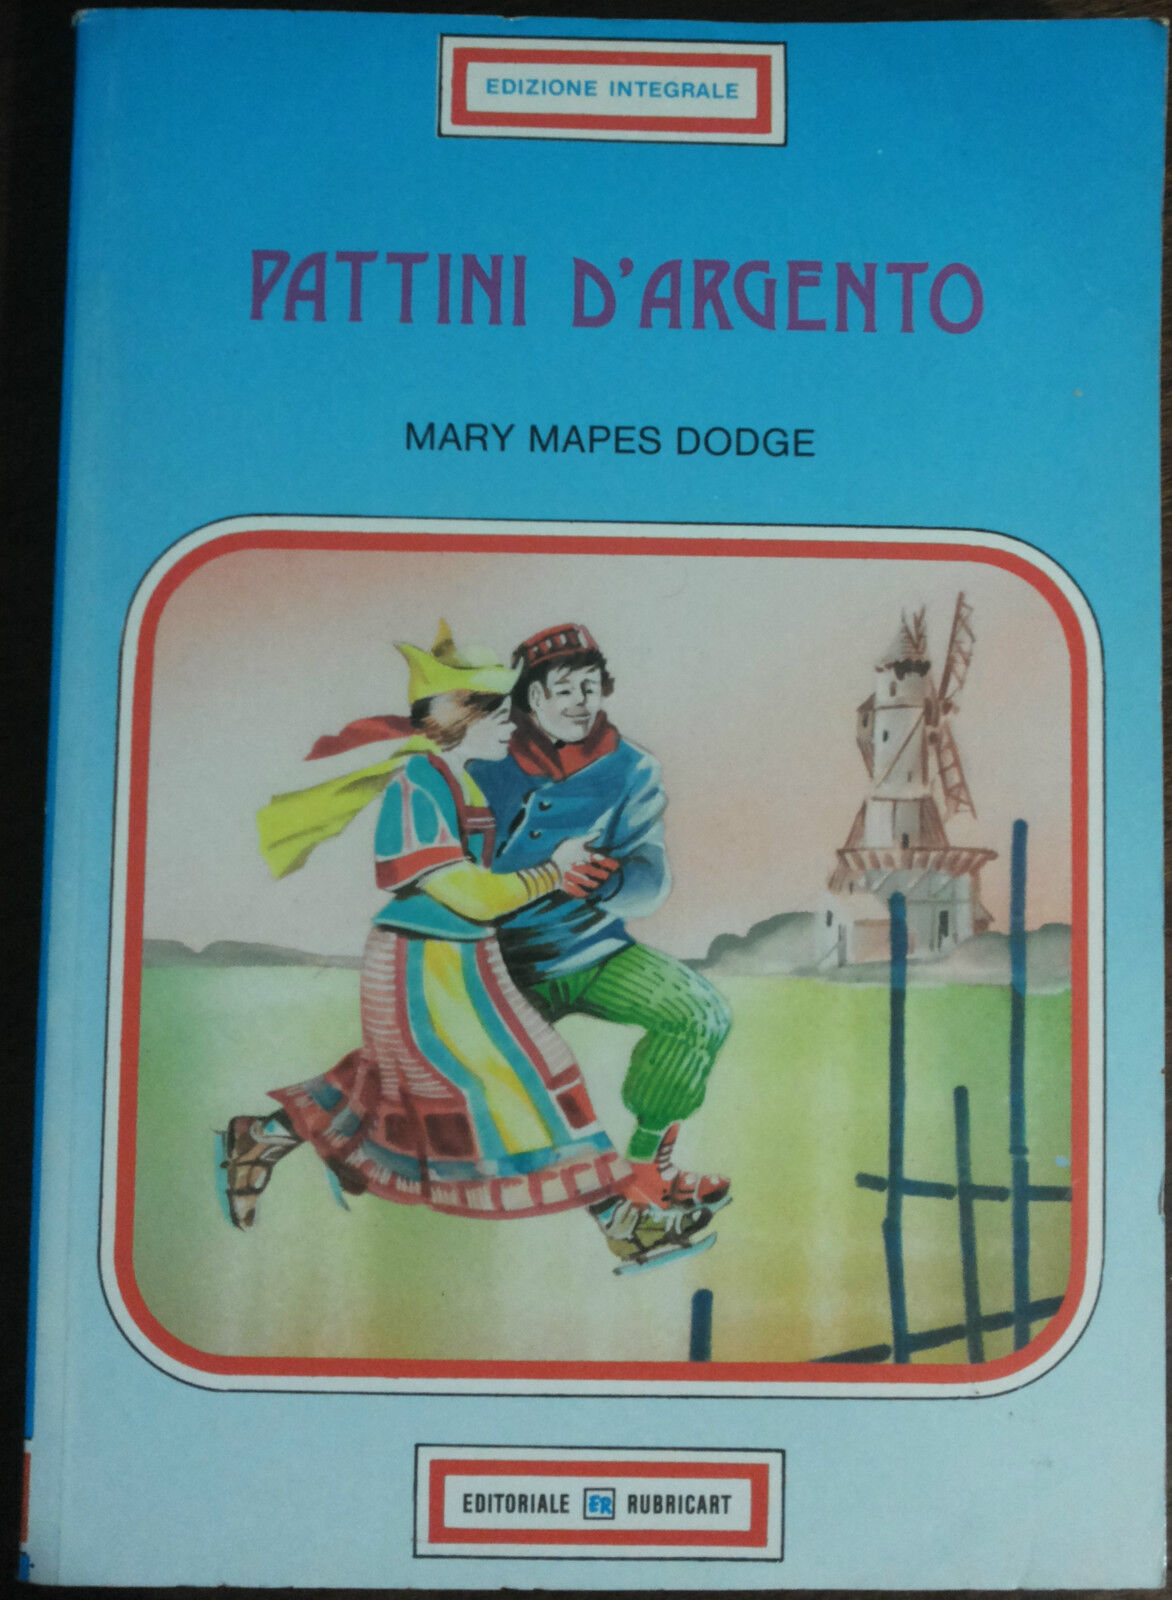  Pattini d'argento -  Mary Mapes Dodge -  Rubricart ,1990 - A